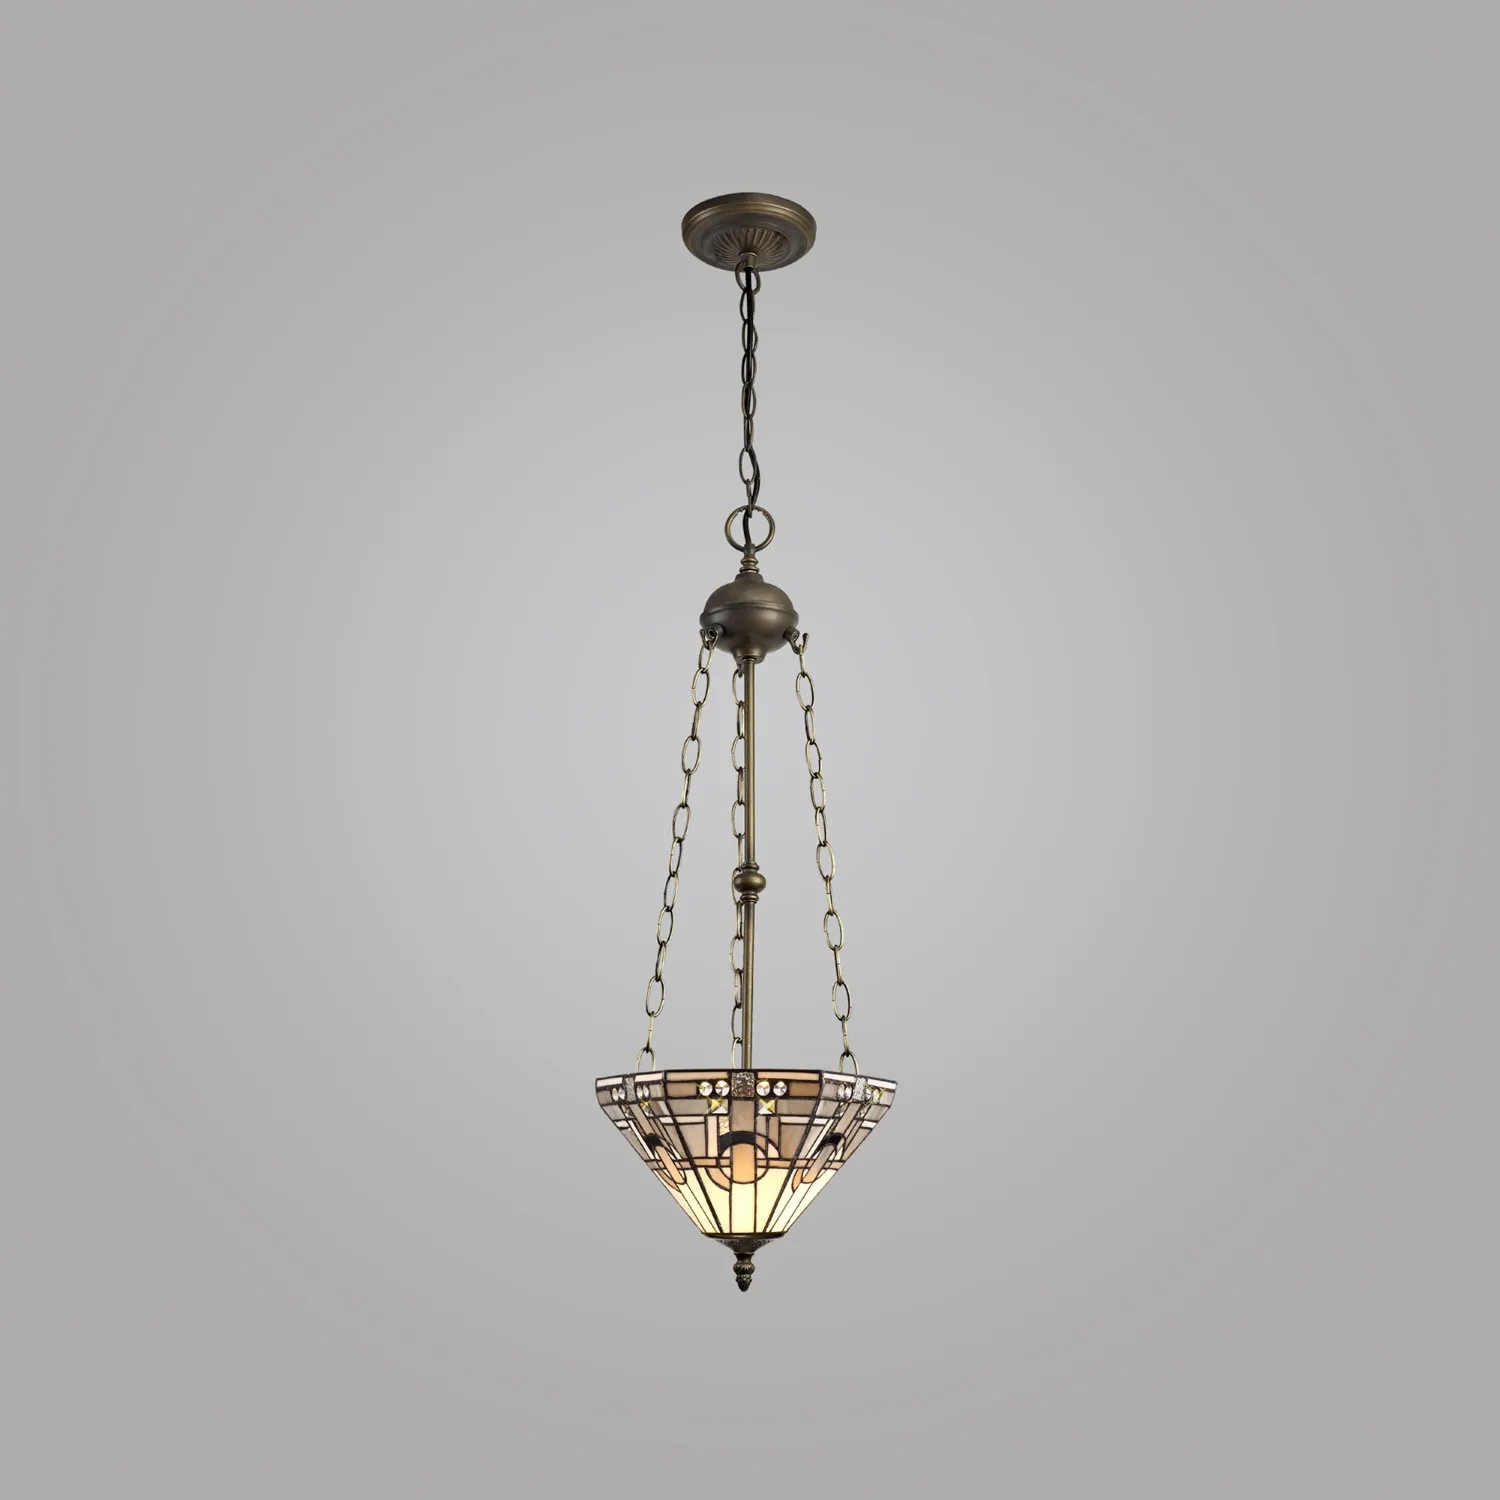 Knebworth 3 Light Uplighter Pendant E27 With 30cm Tiffany Shade, White Grey Black Clear Crystal Aged Antique Brass